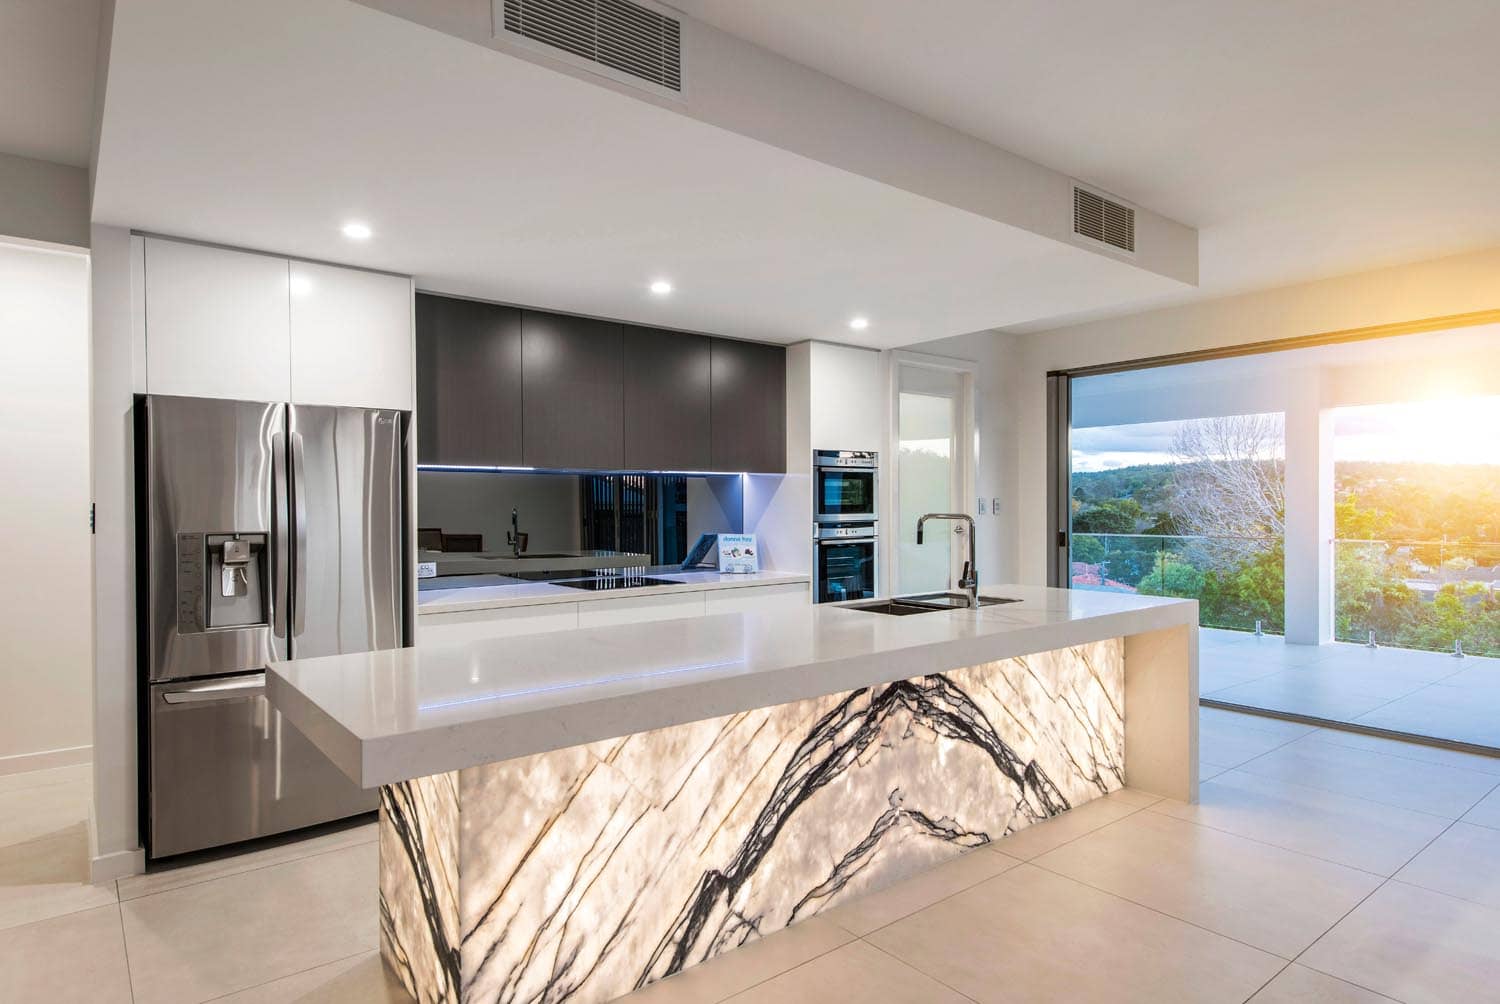 kitchen marble york stunning island custom backlit kitchens islands designs contemporary stone rustic striking completehome grey benchtops wood projects au